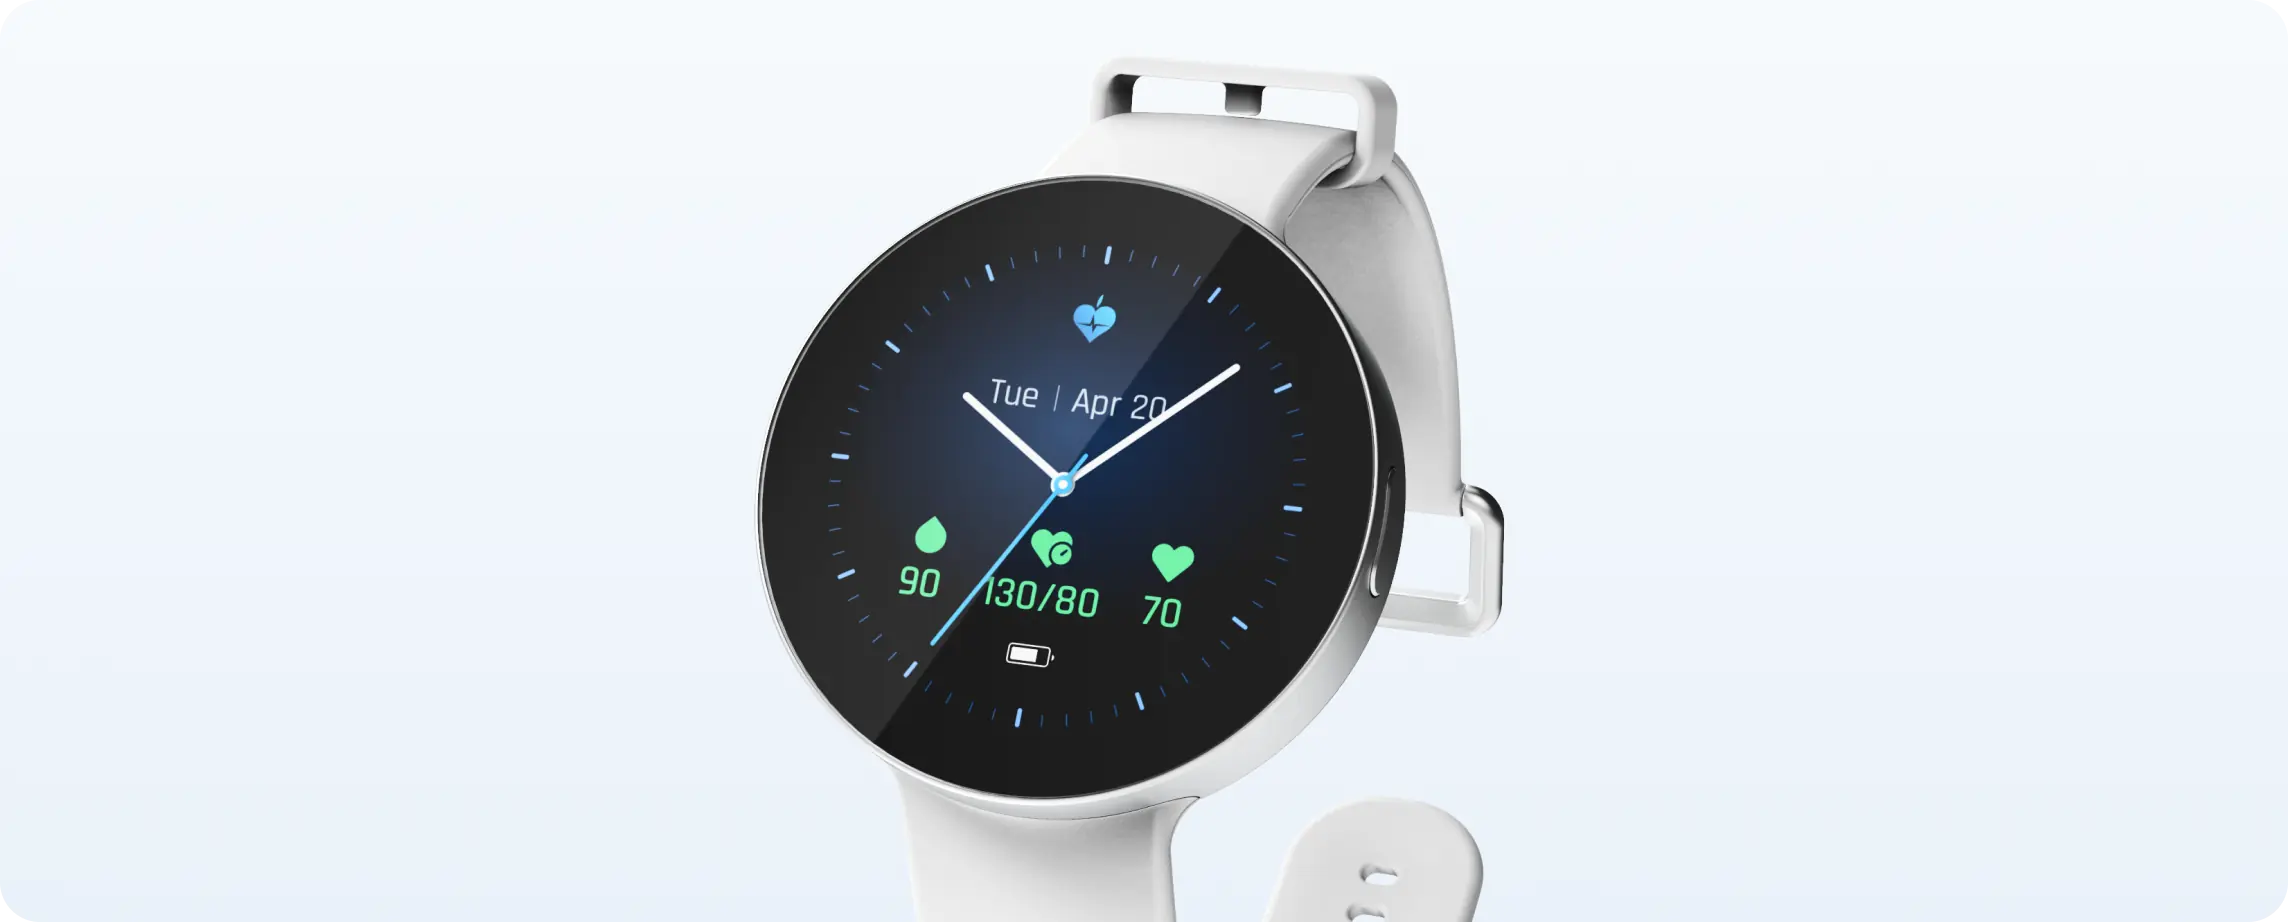 Rendering of LifePlus glucose-monitoring smart-watch, showing watch face